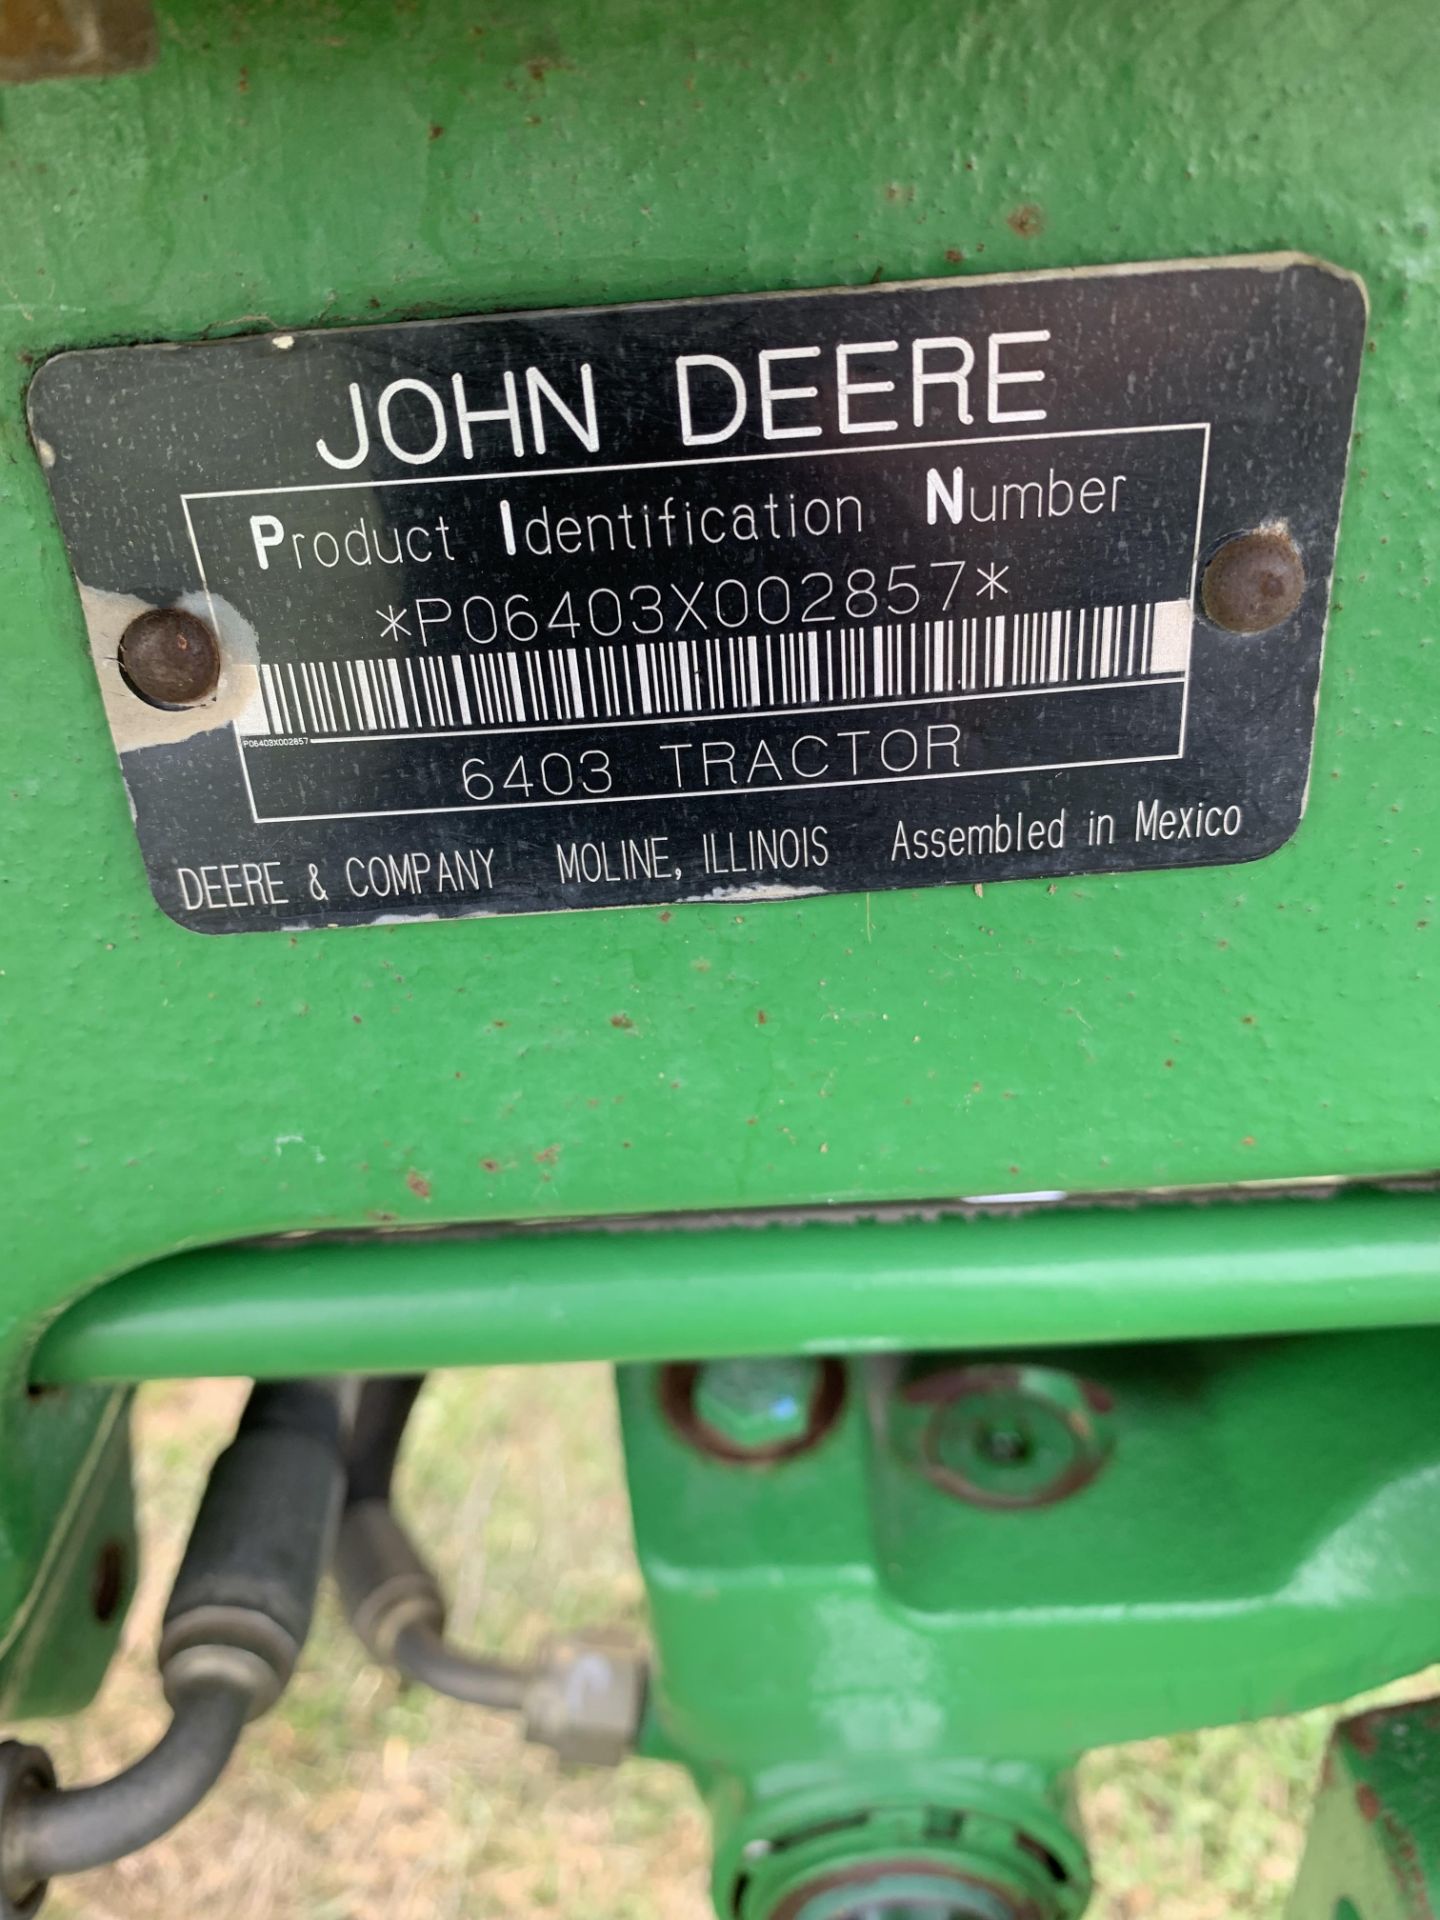 JD 6403 2WD Tractor, ROPS Canopy, 2 HYD. Remotes, 1982 Hrs. Serial # - Image 4 of 7